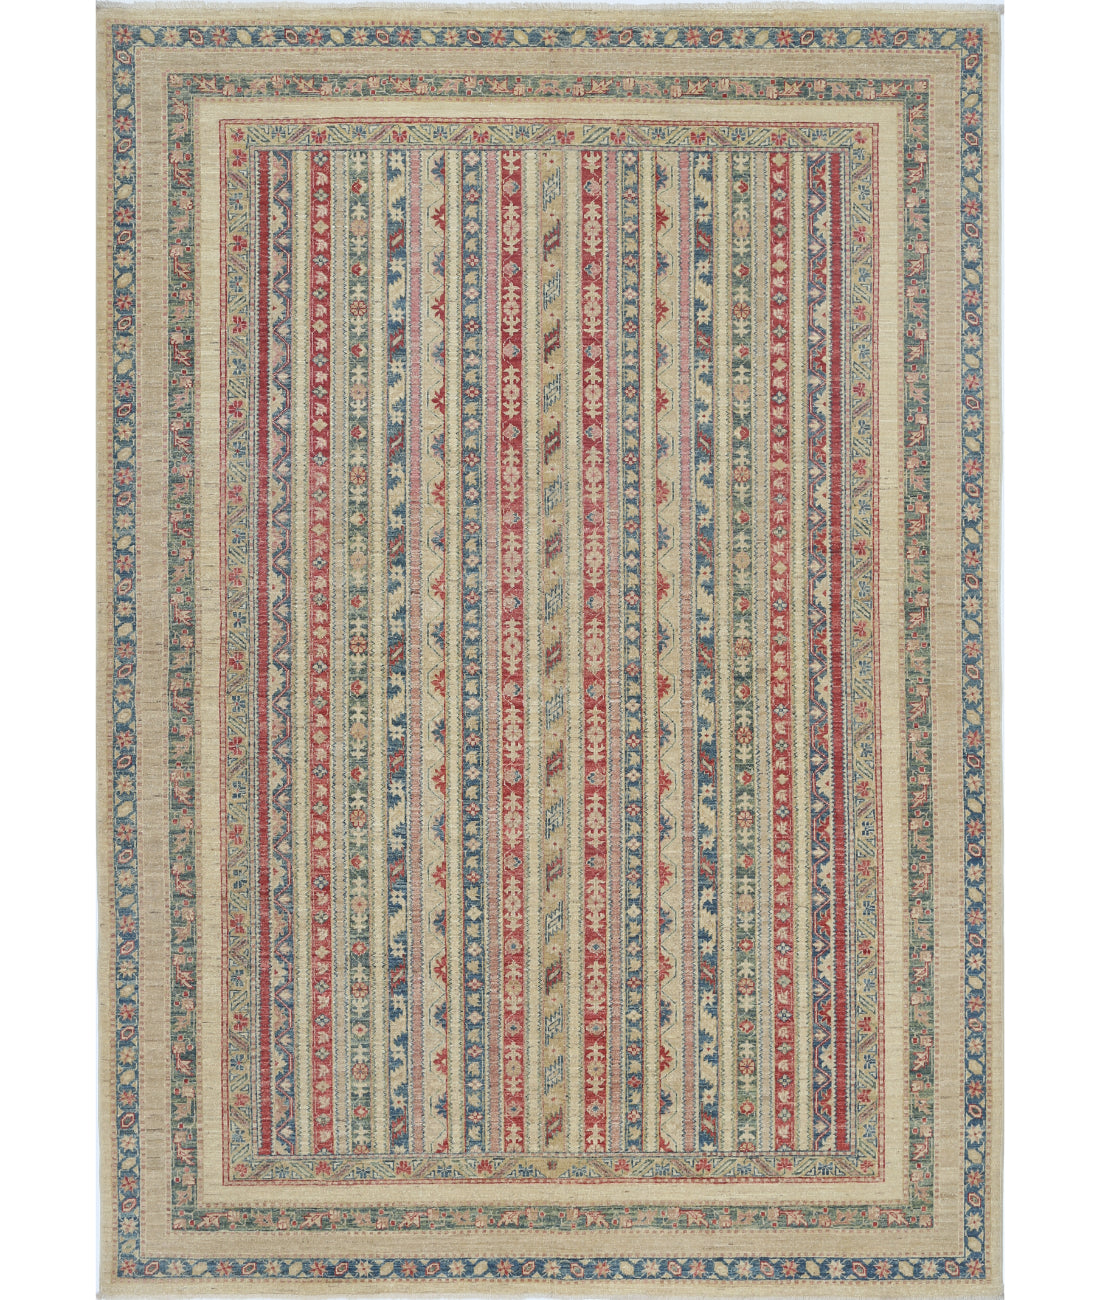 Hand Knotted Shaal Wool Rug - 6'9'' x 9'7'' 6'9'' x 9'7'' (203 X 288) / Multi / Multi